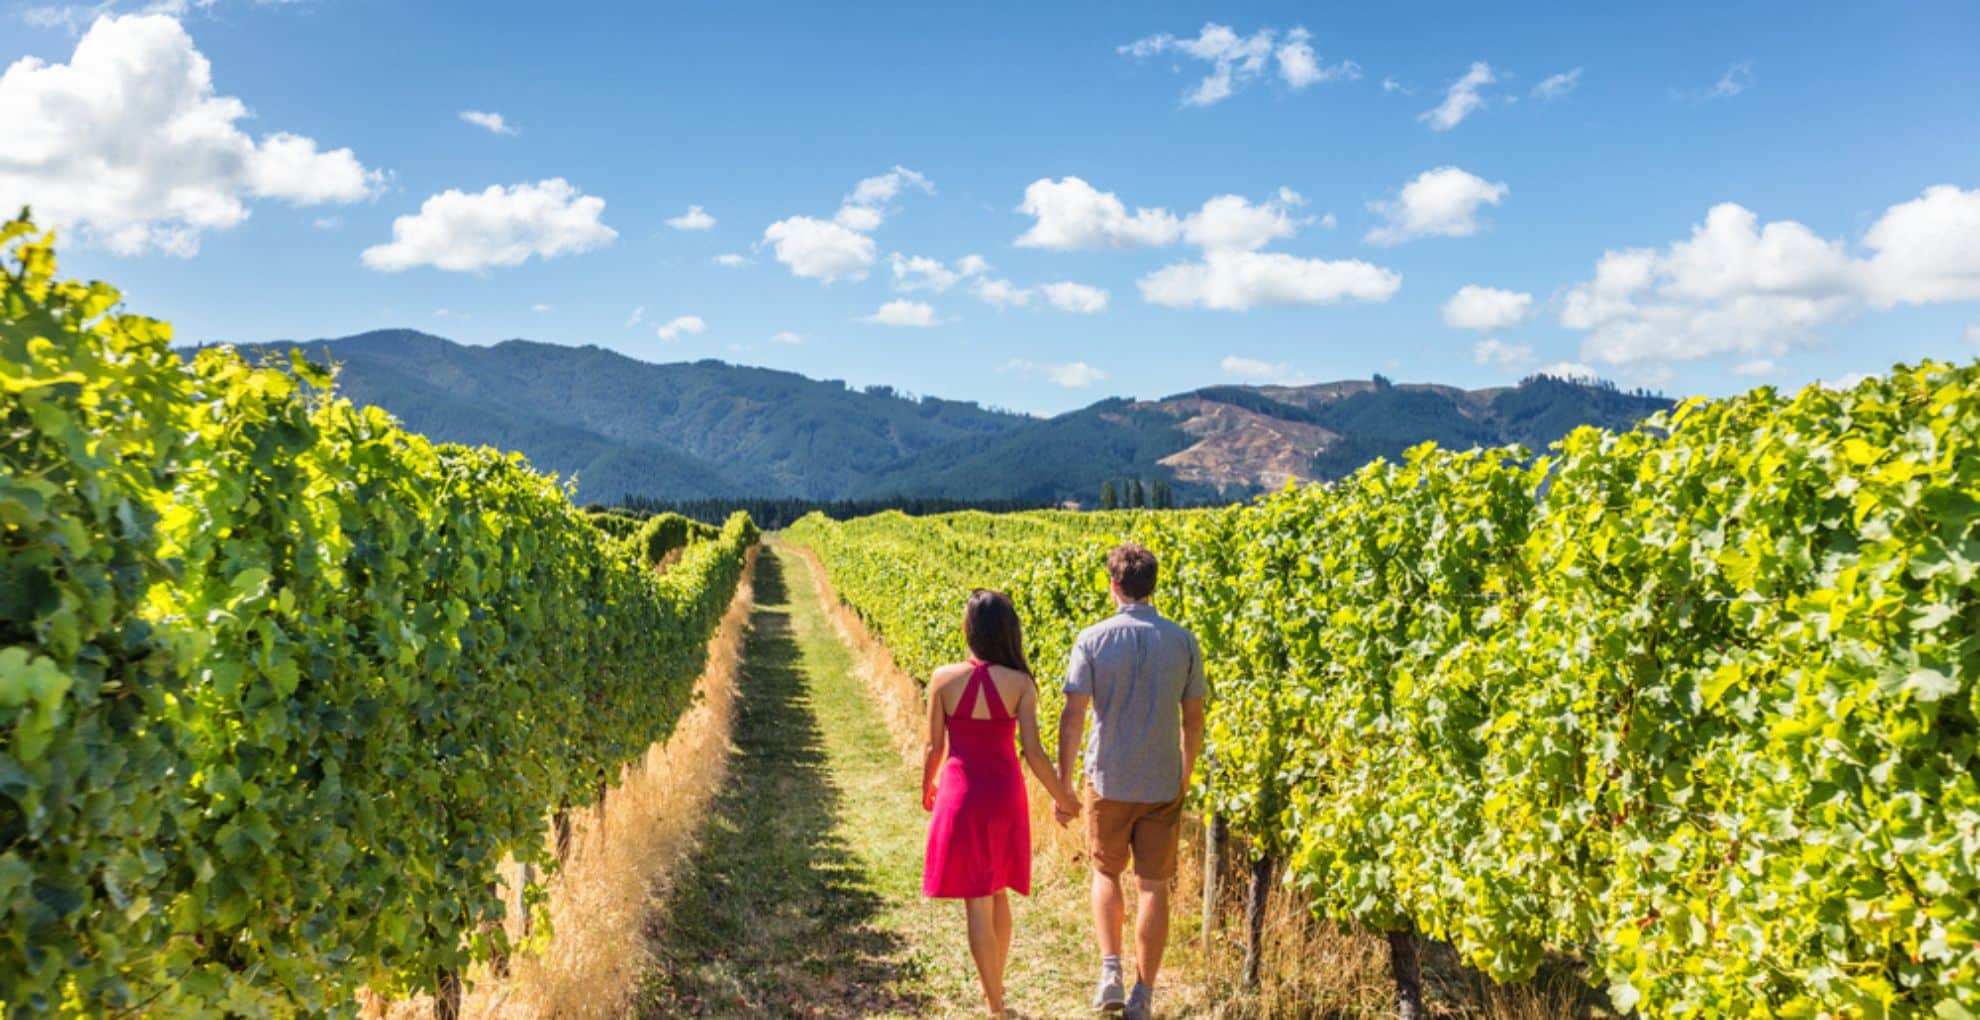 lady in a pink dress and man in shorts and a tshirt walking through vineyards